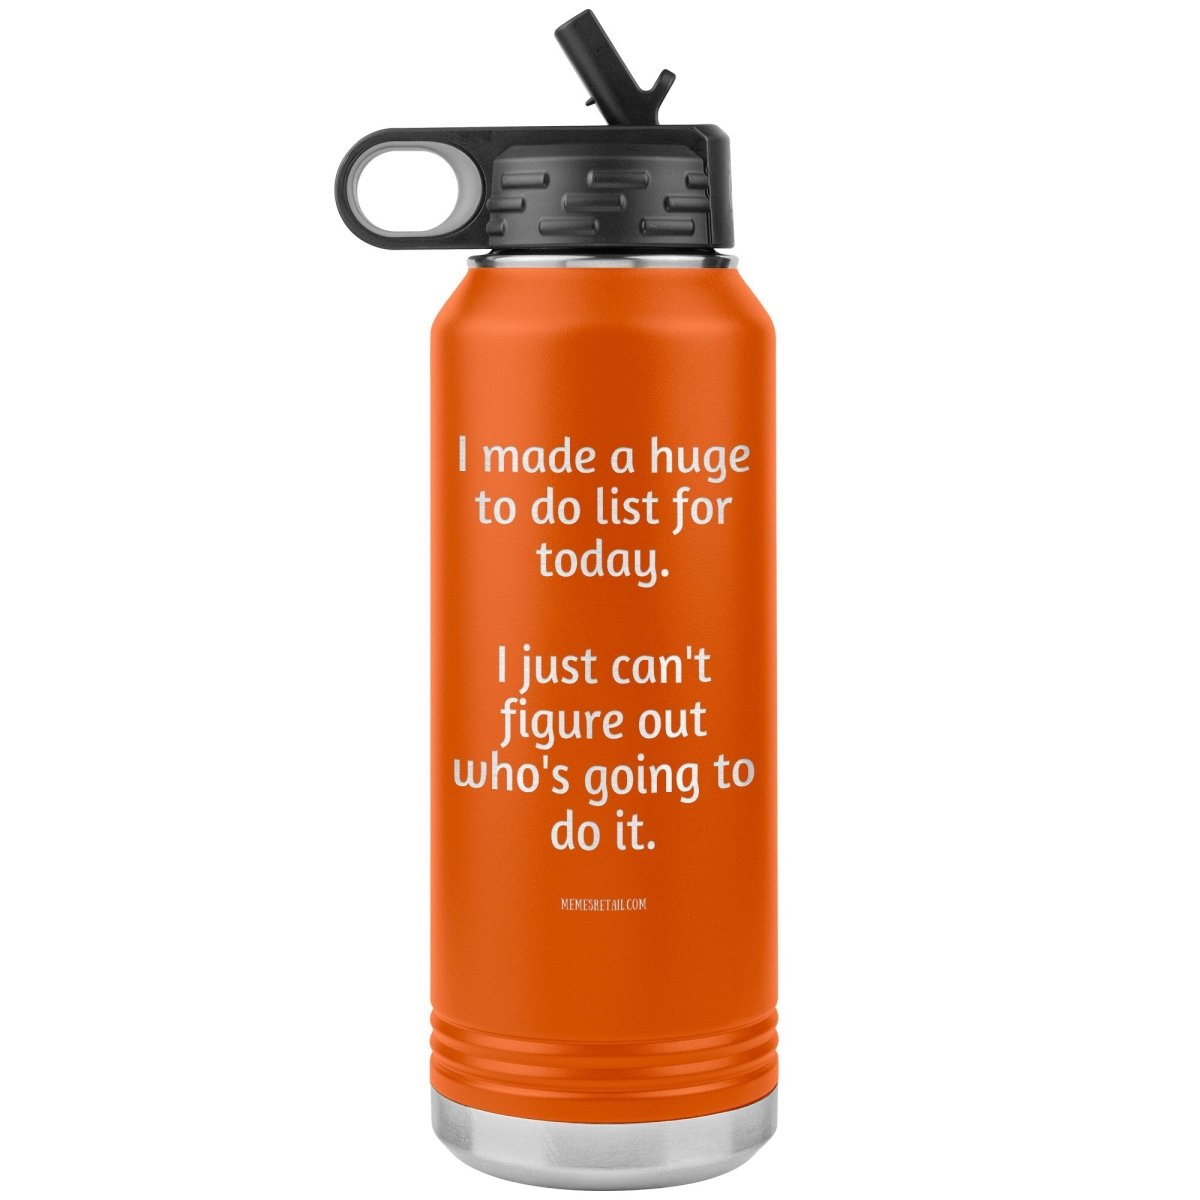 I made a huge to do list for today. I just can't figure out who's going to do it. 32 oz Water Tumbler, Orange - MemesRetail.com